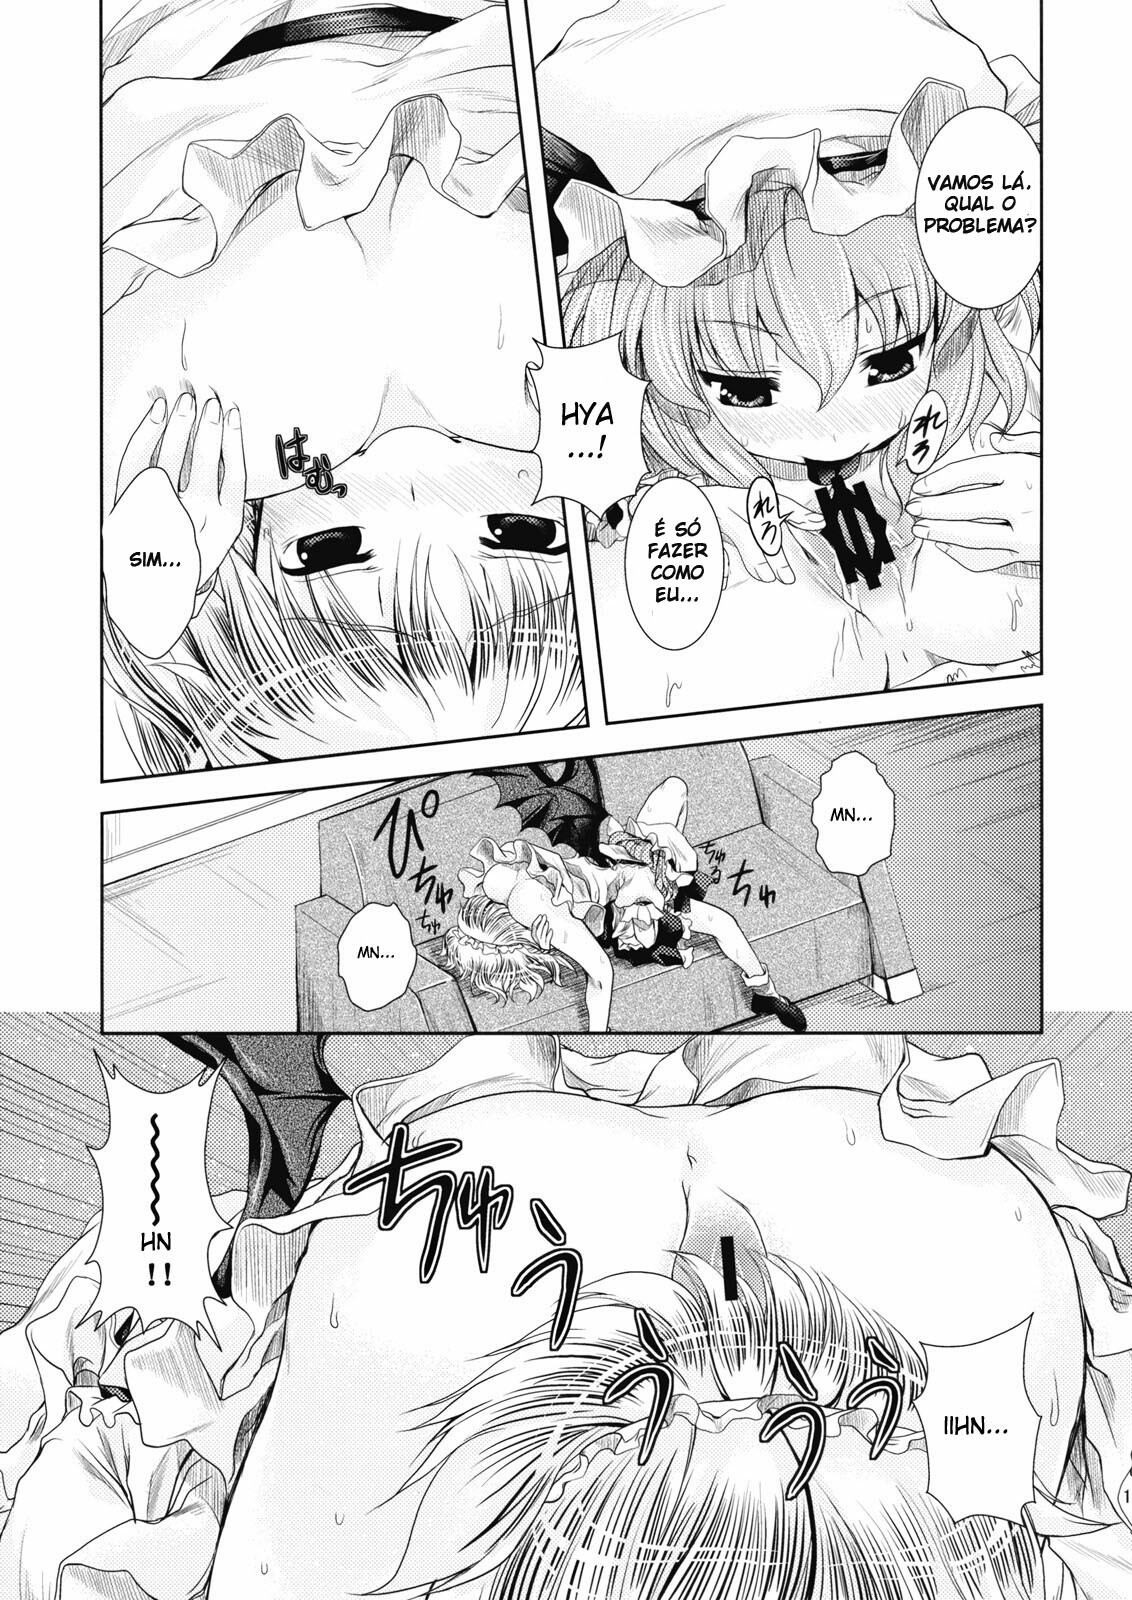 (ComiComi13) [Memoria (Tilm)] Bloody Blood (Touhou Project) [Portuguese-BR] page 6 full